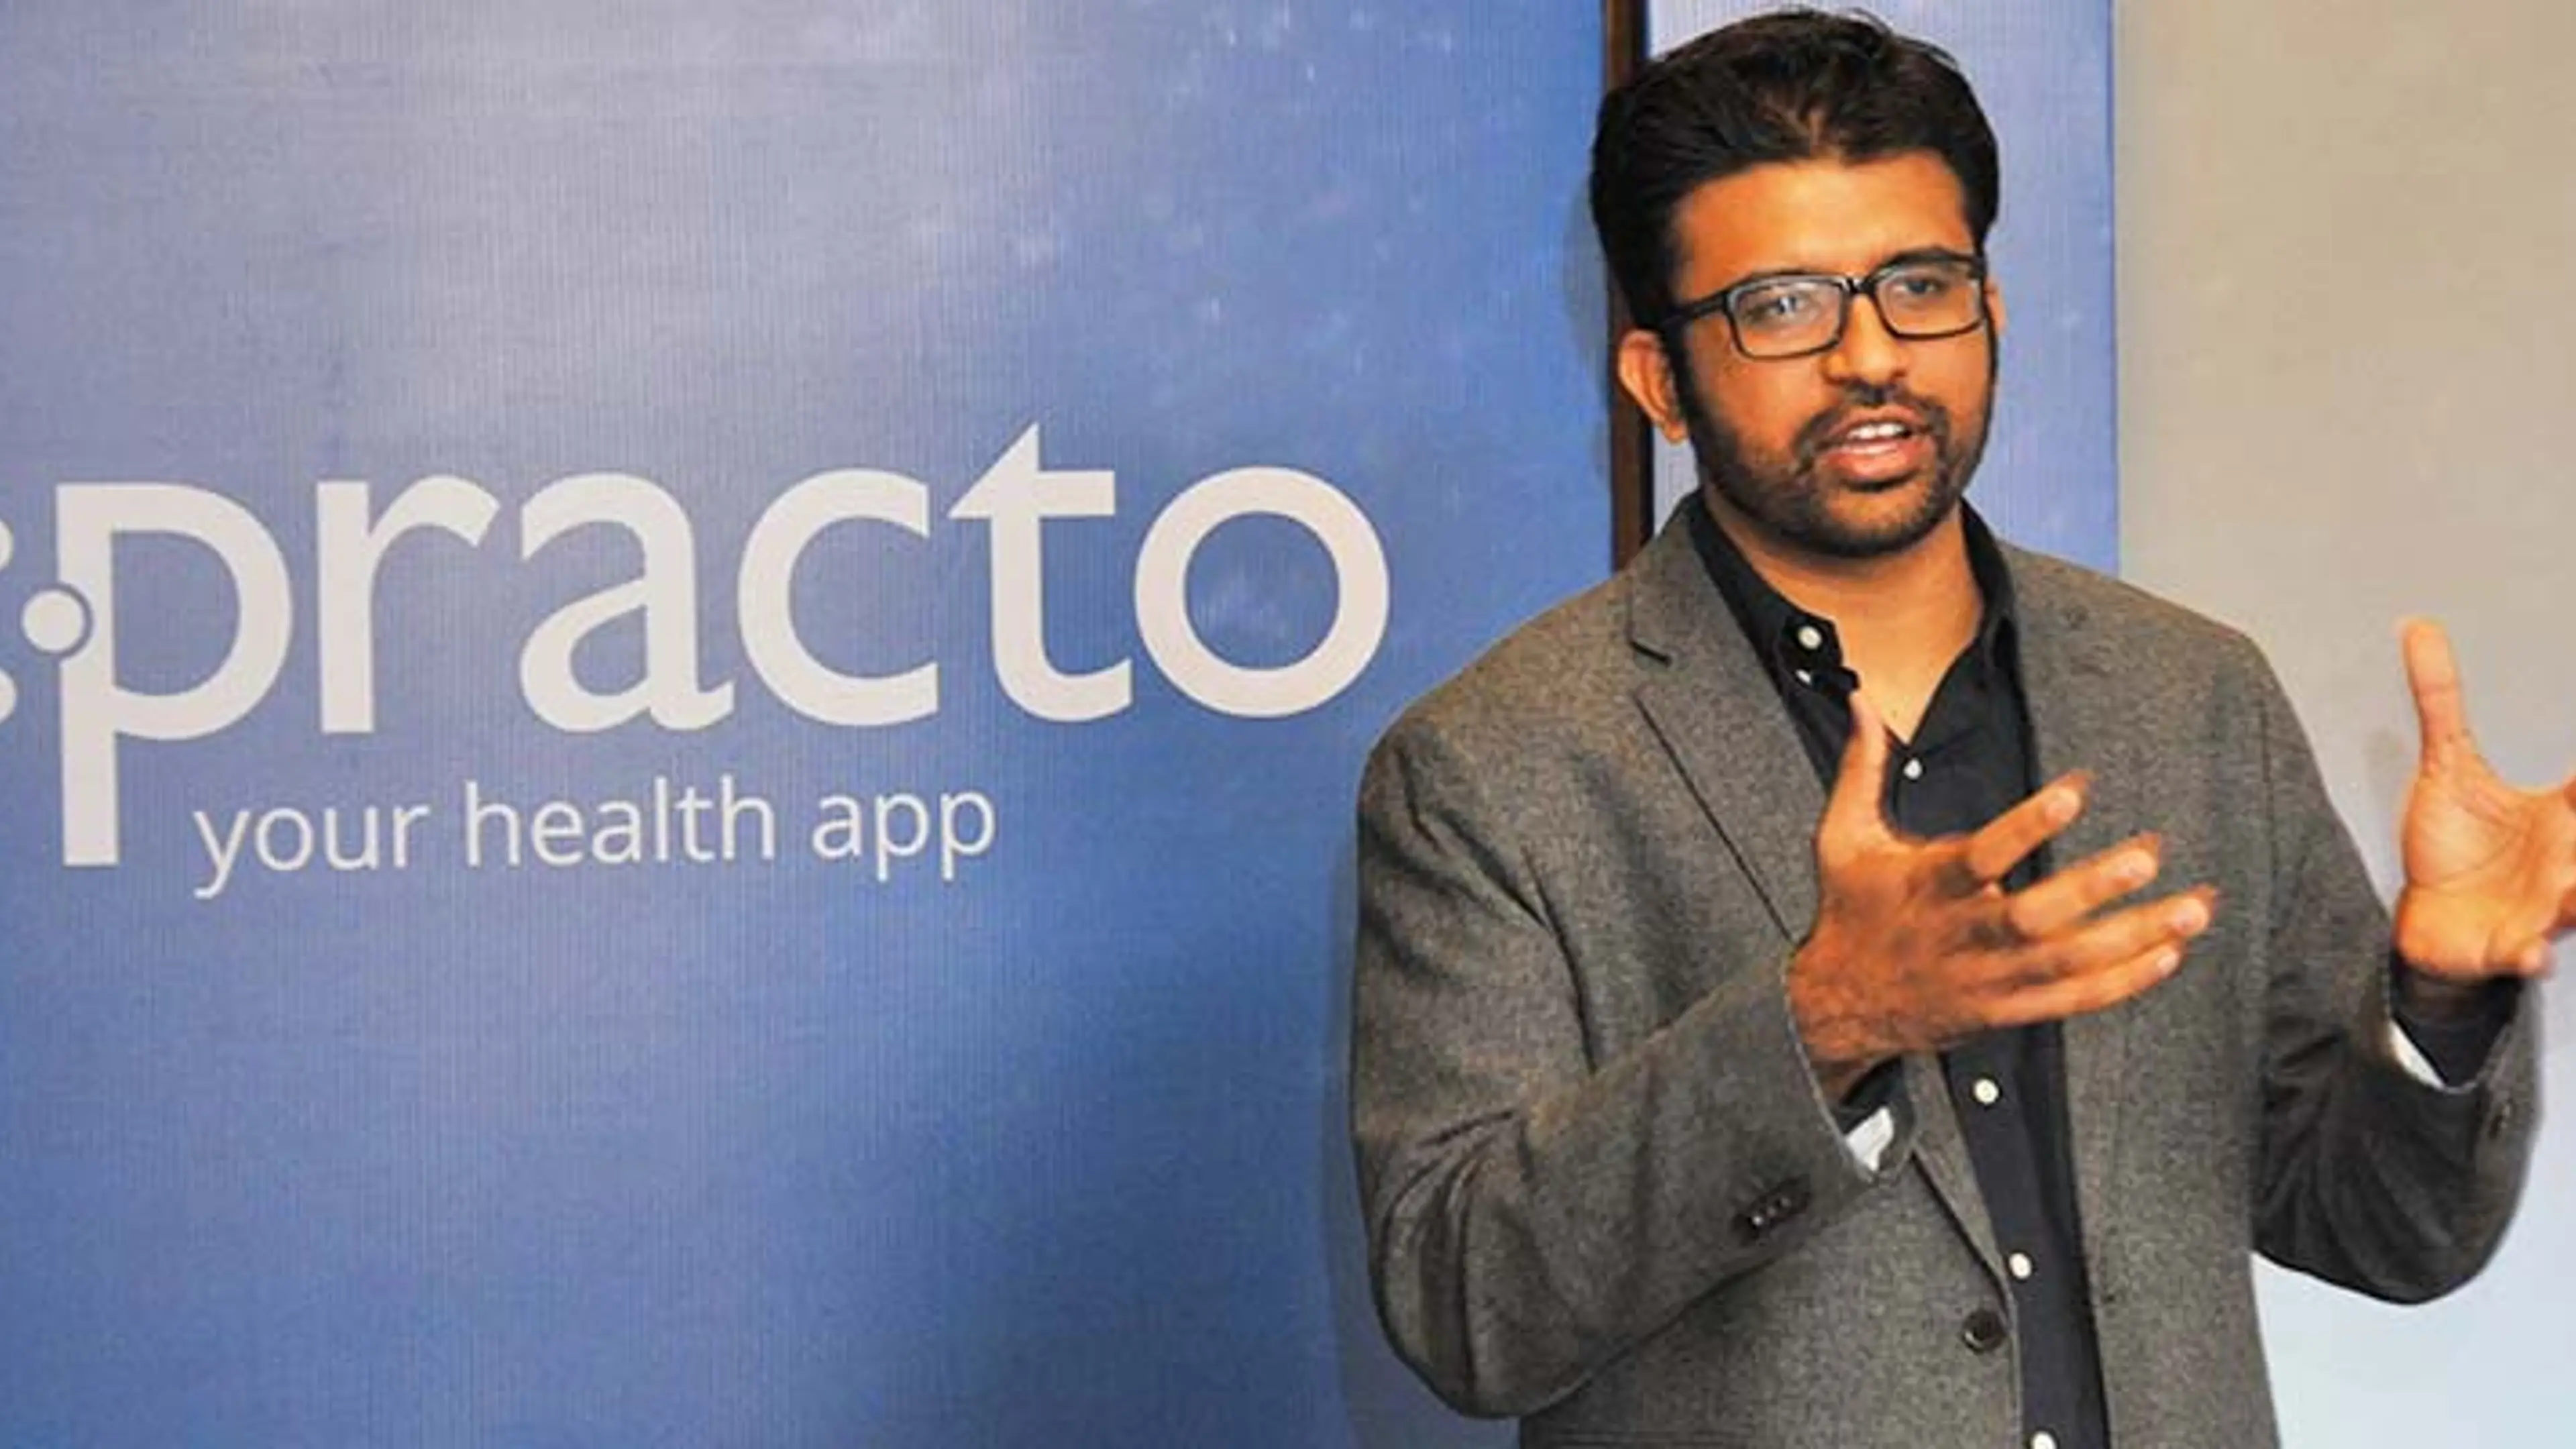 Shashank ND, Co-Founder and CEO of Practo on challenges, funding and evolution of the company and the healthcare industry